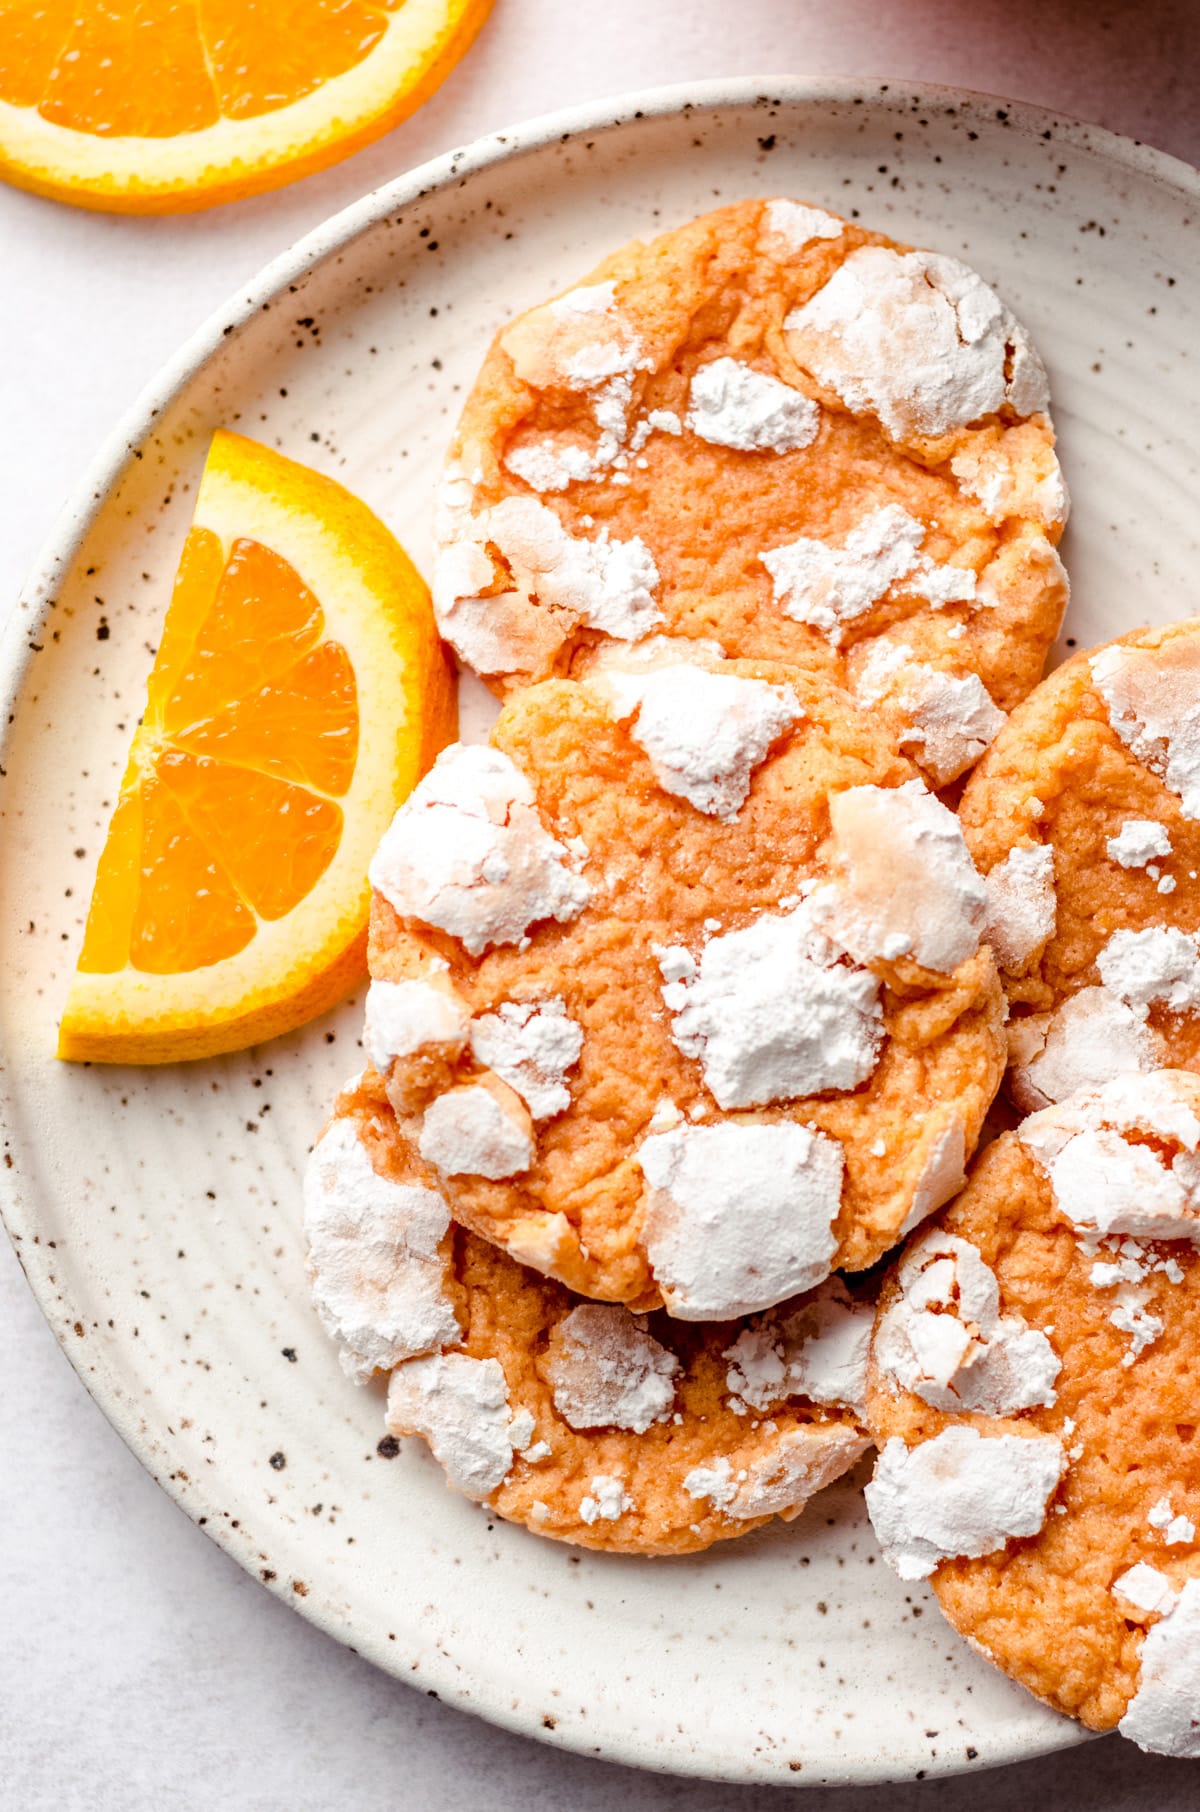 aerial photo of orange creamsicle cookies on a plate with orange slices